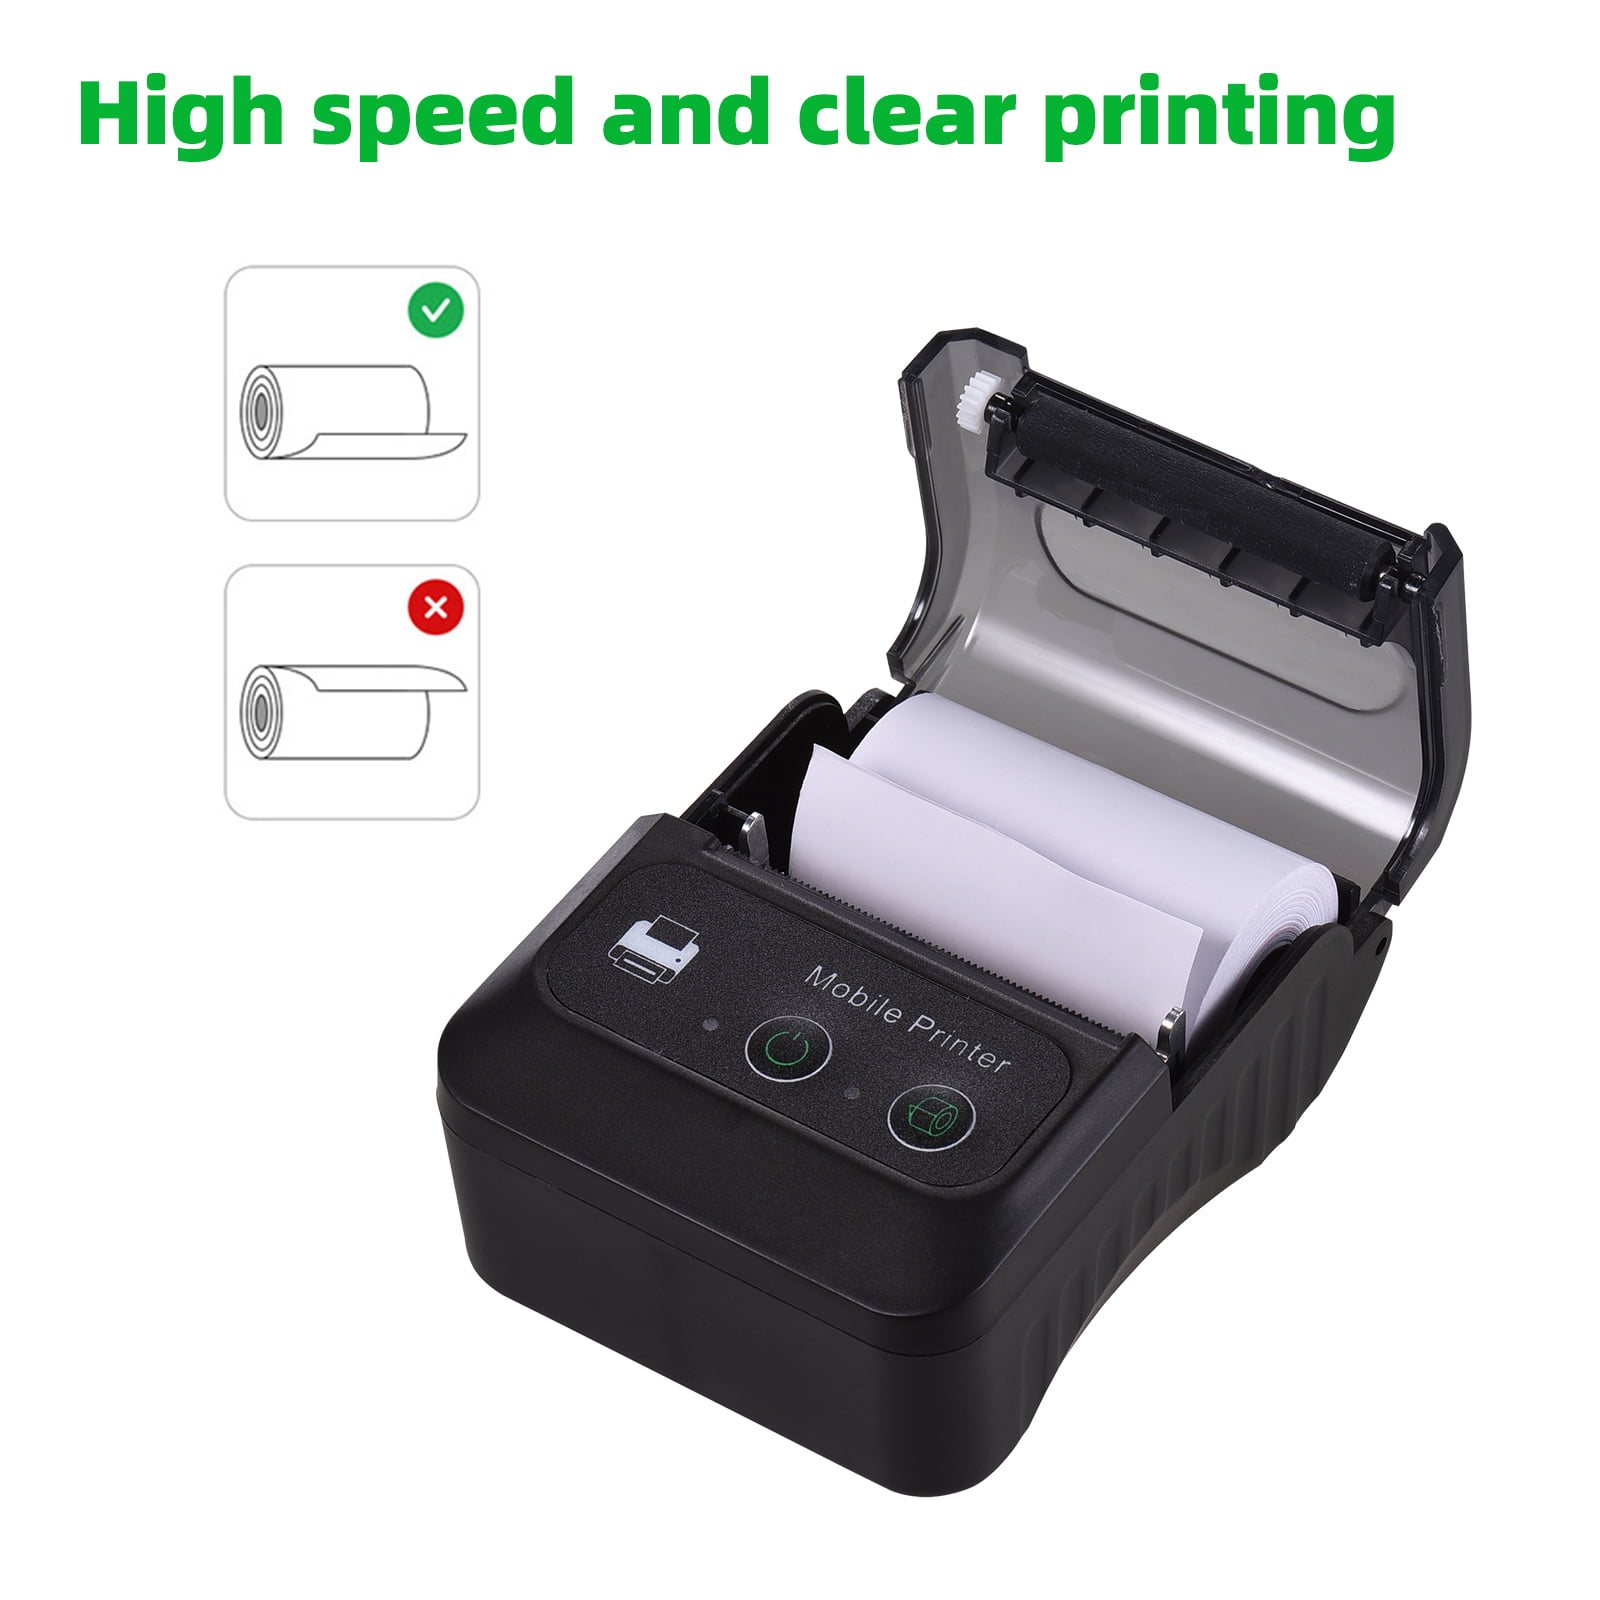 Upwade Thermal Receipt Printer Portable Mobile Mini Small Printer 2 Inch  Bluetooth + USB 58MM for Restaurant, Sales, Kitchen, Retail Supports Window